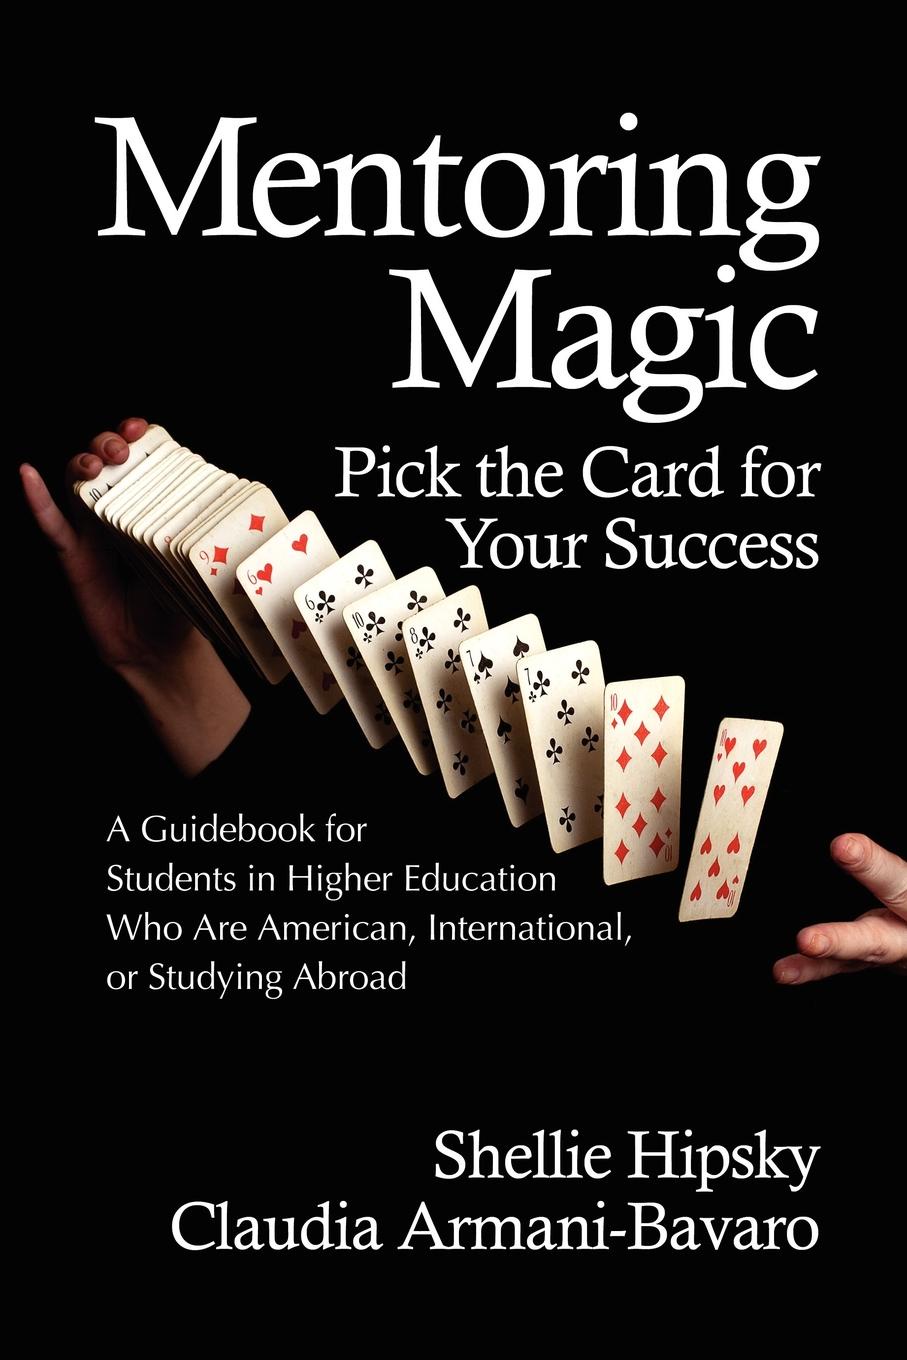 Mentoring Magic. Pick the Card for Your Success a Guidebook for Students in Higher Education Who Are American, International, or Studyi